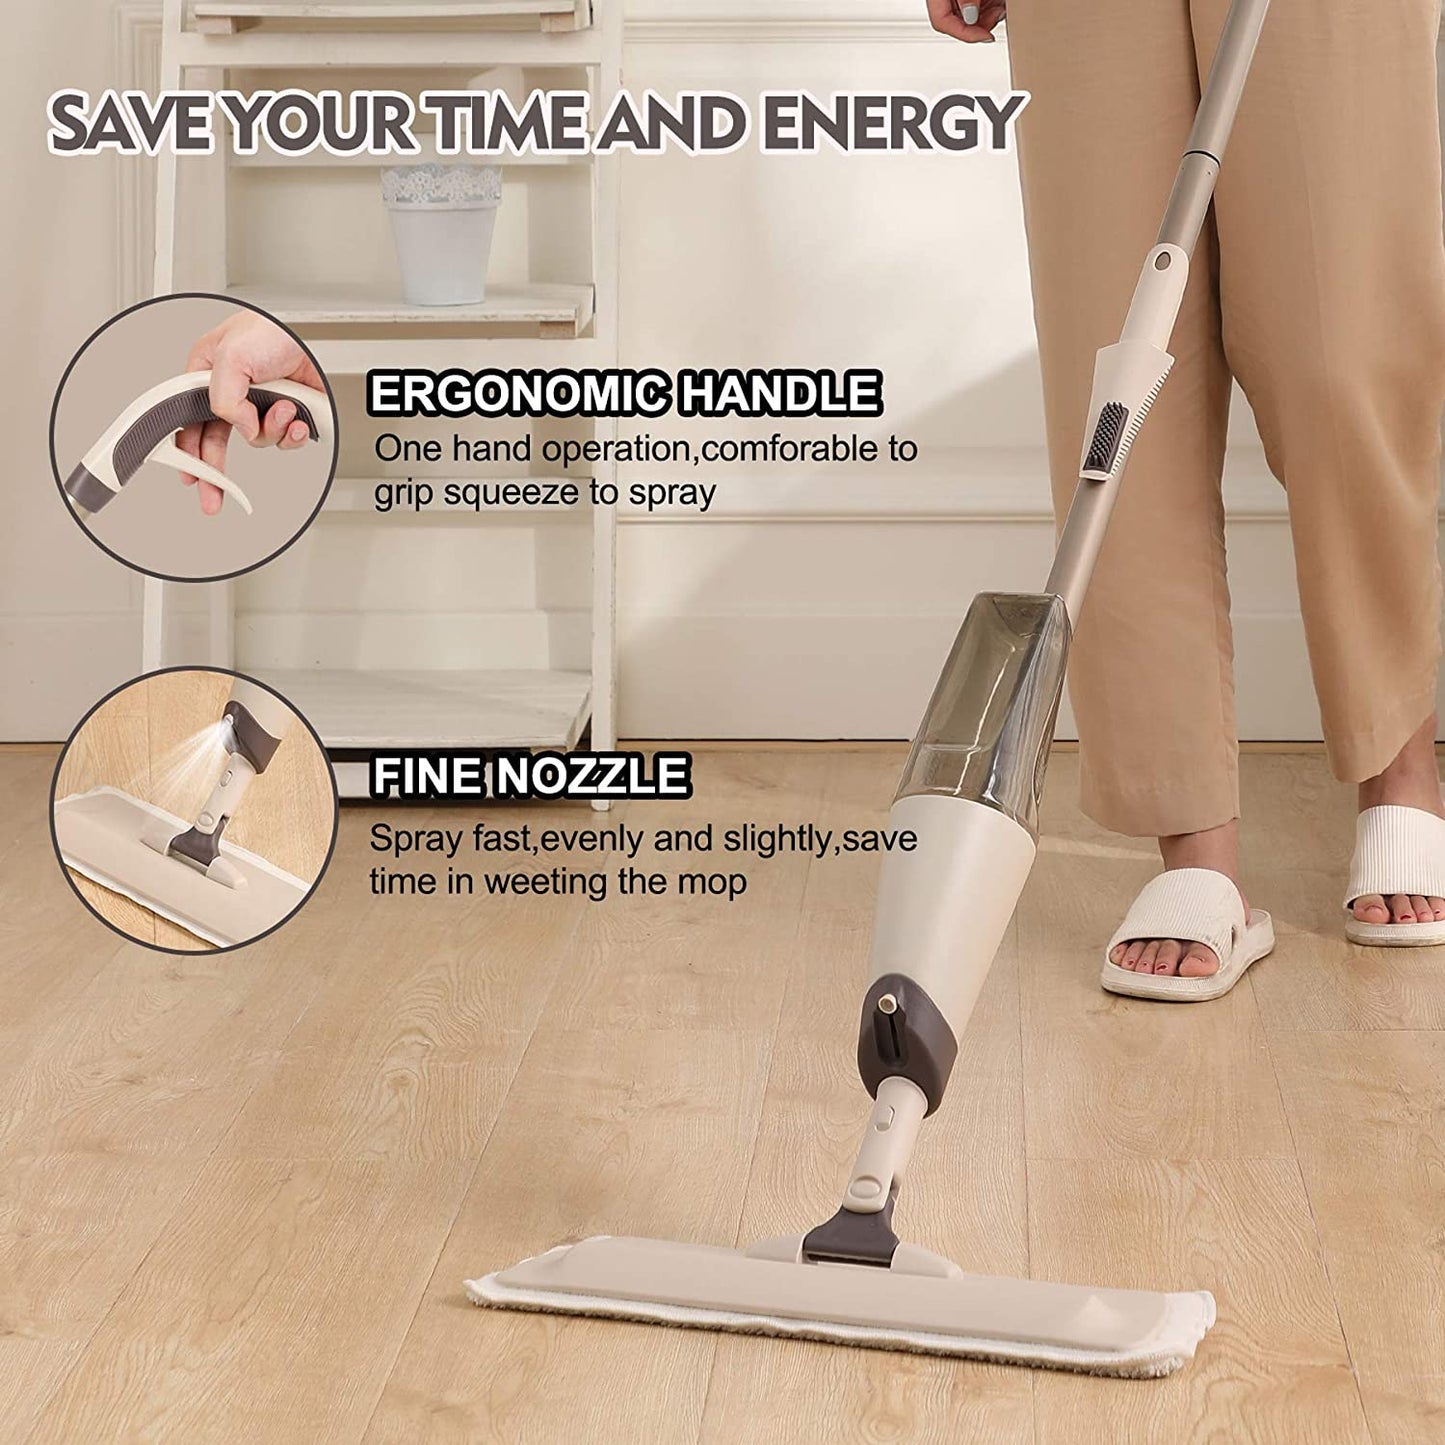 Eyliden Spray Mop - 750ml Large Water Tank, Dry Wet Floor Cleaning Mop with 2pcs Microfiber Washable Pads, Wet Jet Flat Mop for Wood Floor Kitchen Hardwood Laminate Ceramic Tiles Cleaning (Brown)